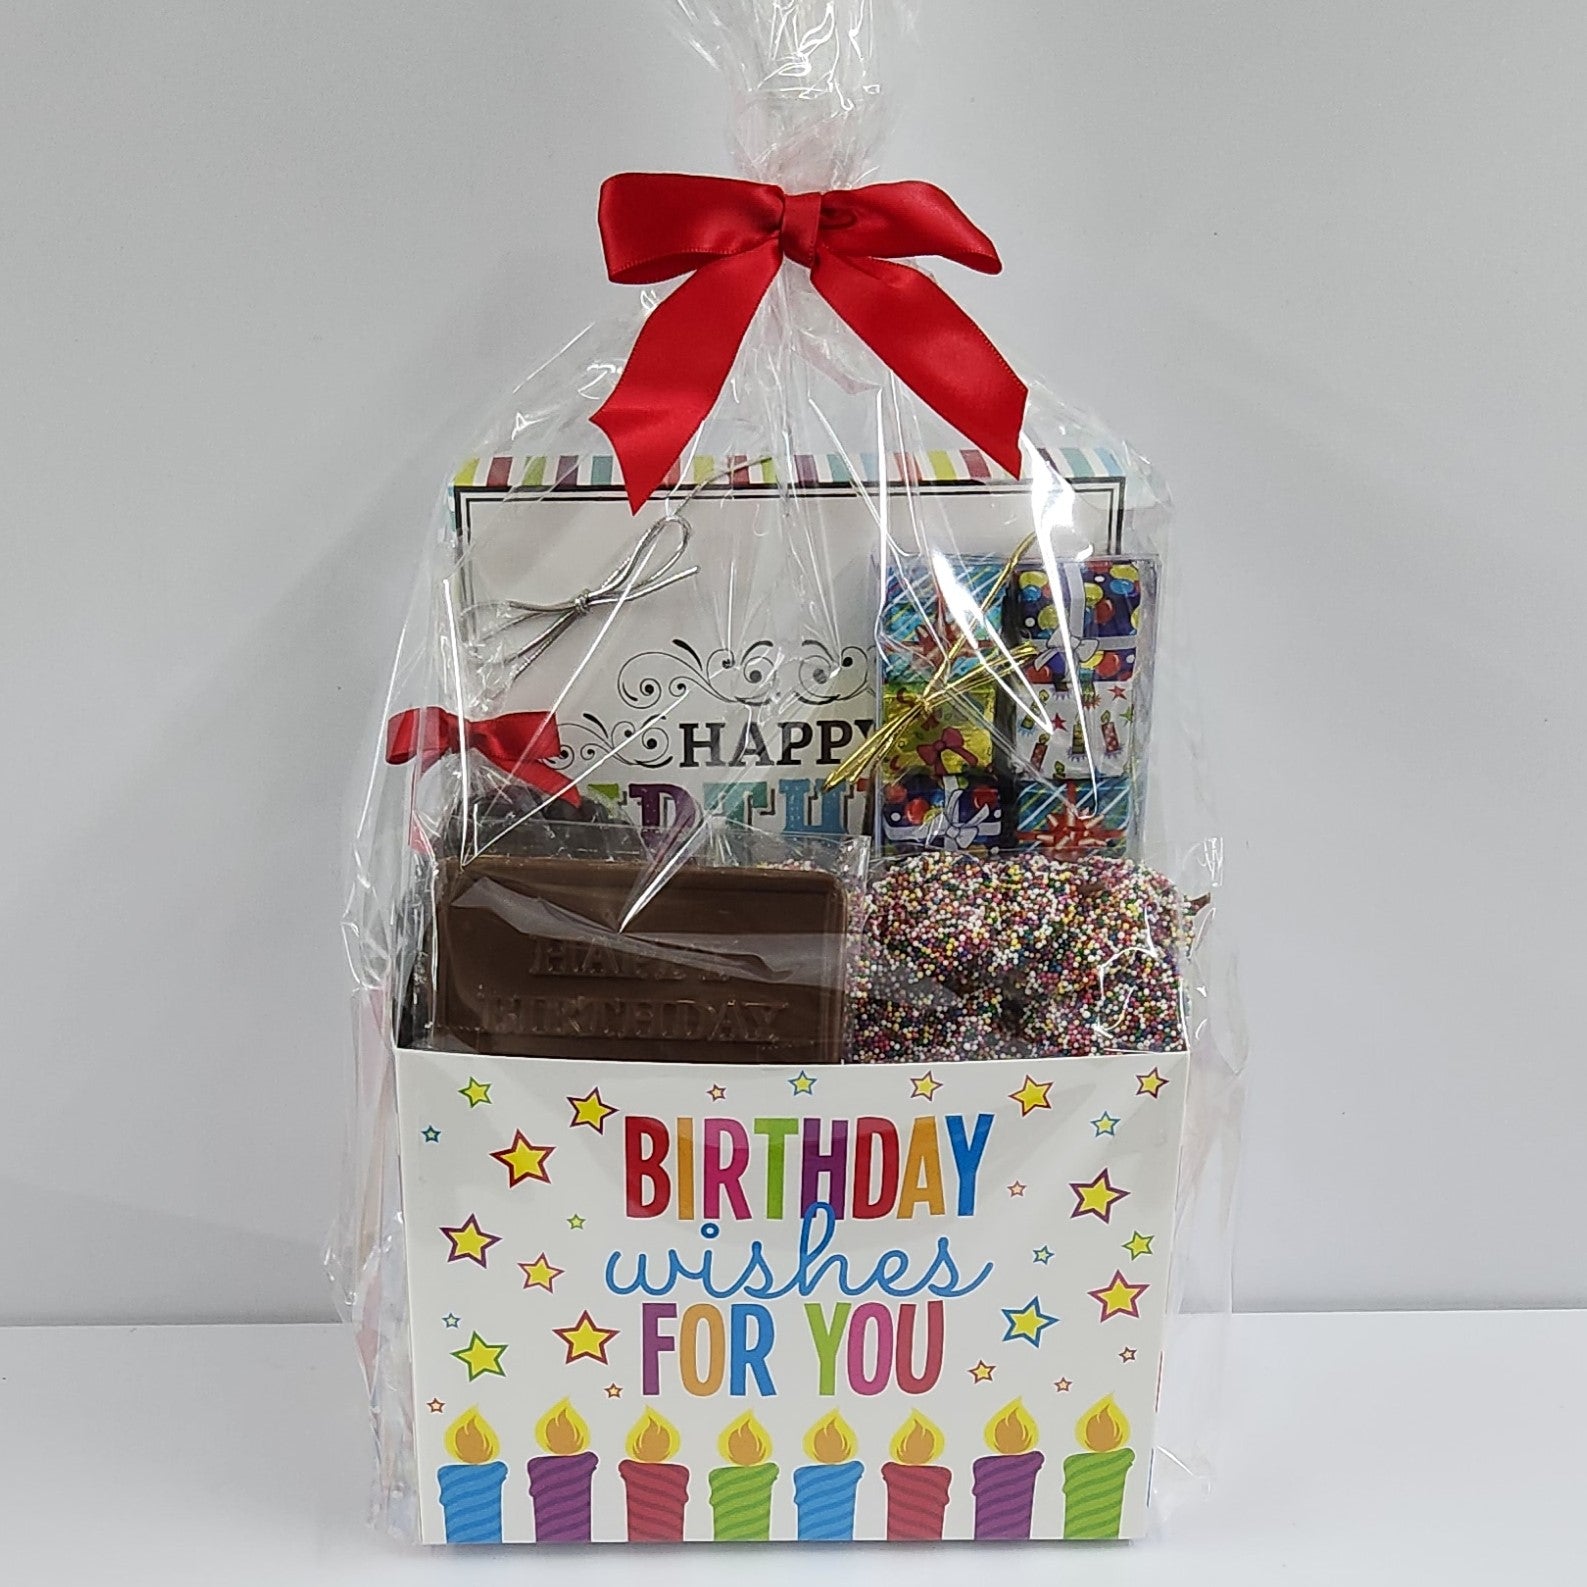 Birthday Wishes Candy Gift Basket from Stage Stop Candy wrapped in plastic with a red bow